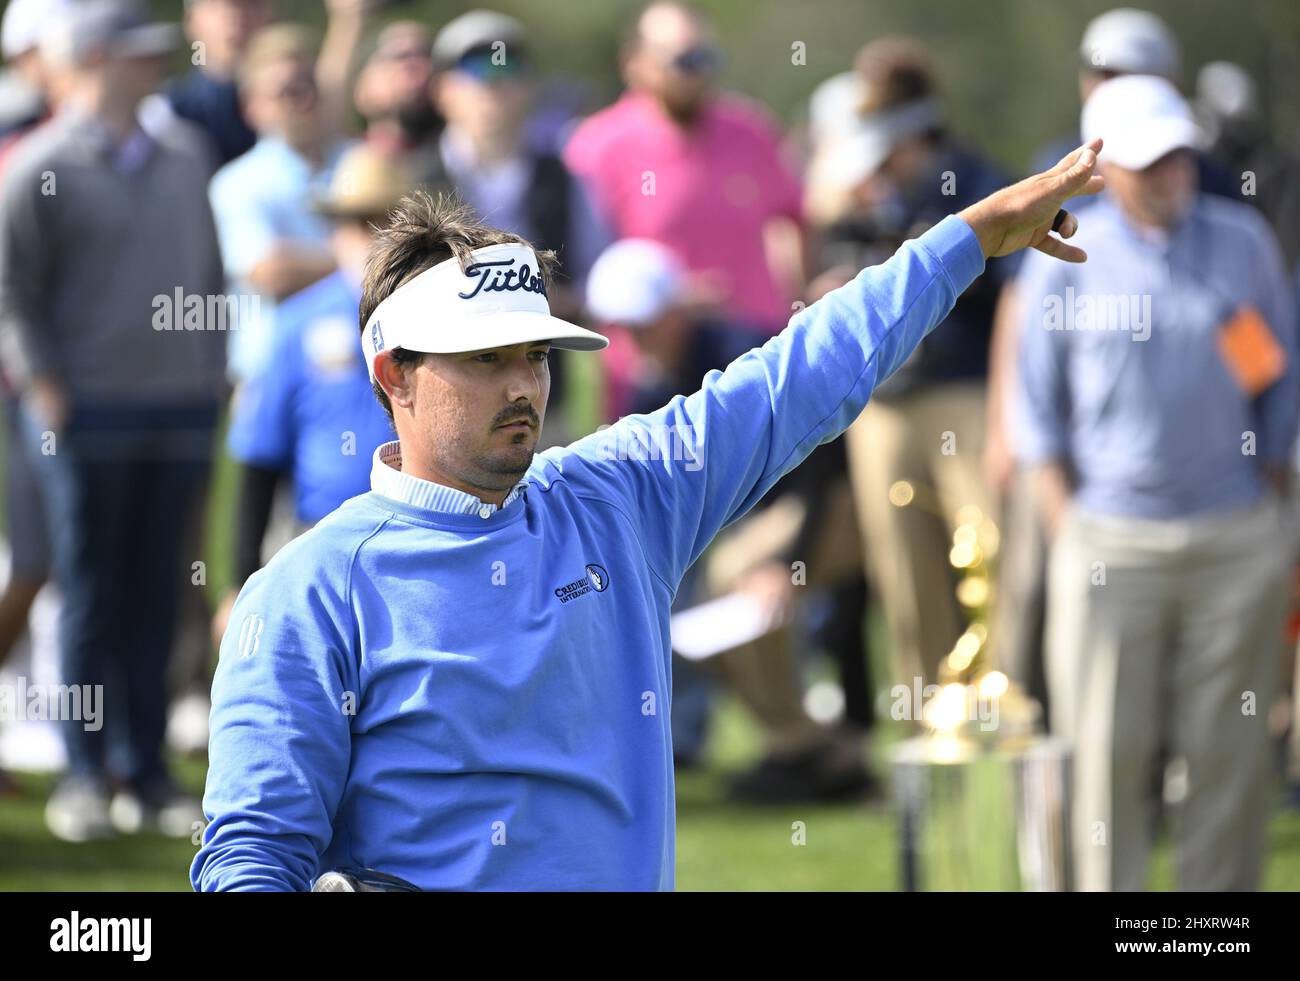 Ponte Vedra Beach, United States. 14th Mar, 2022. Hank Lebioda of the United States gestures after teeing off on the 1st hole in the final round of the 2022 Players PGA Championship on the Stadium Course at TPC Sawgrass in Ponte Vedra Beach, Florida on Monday, March 14, 2022. The golf tournament has been extended one day due to weather delays. Photo by Joe Marino/UPI Credit: UPI/Alamy Live News Stock Photo